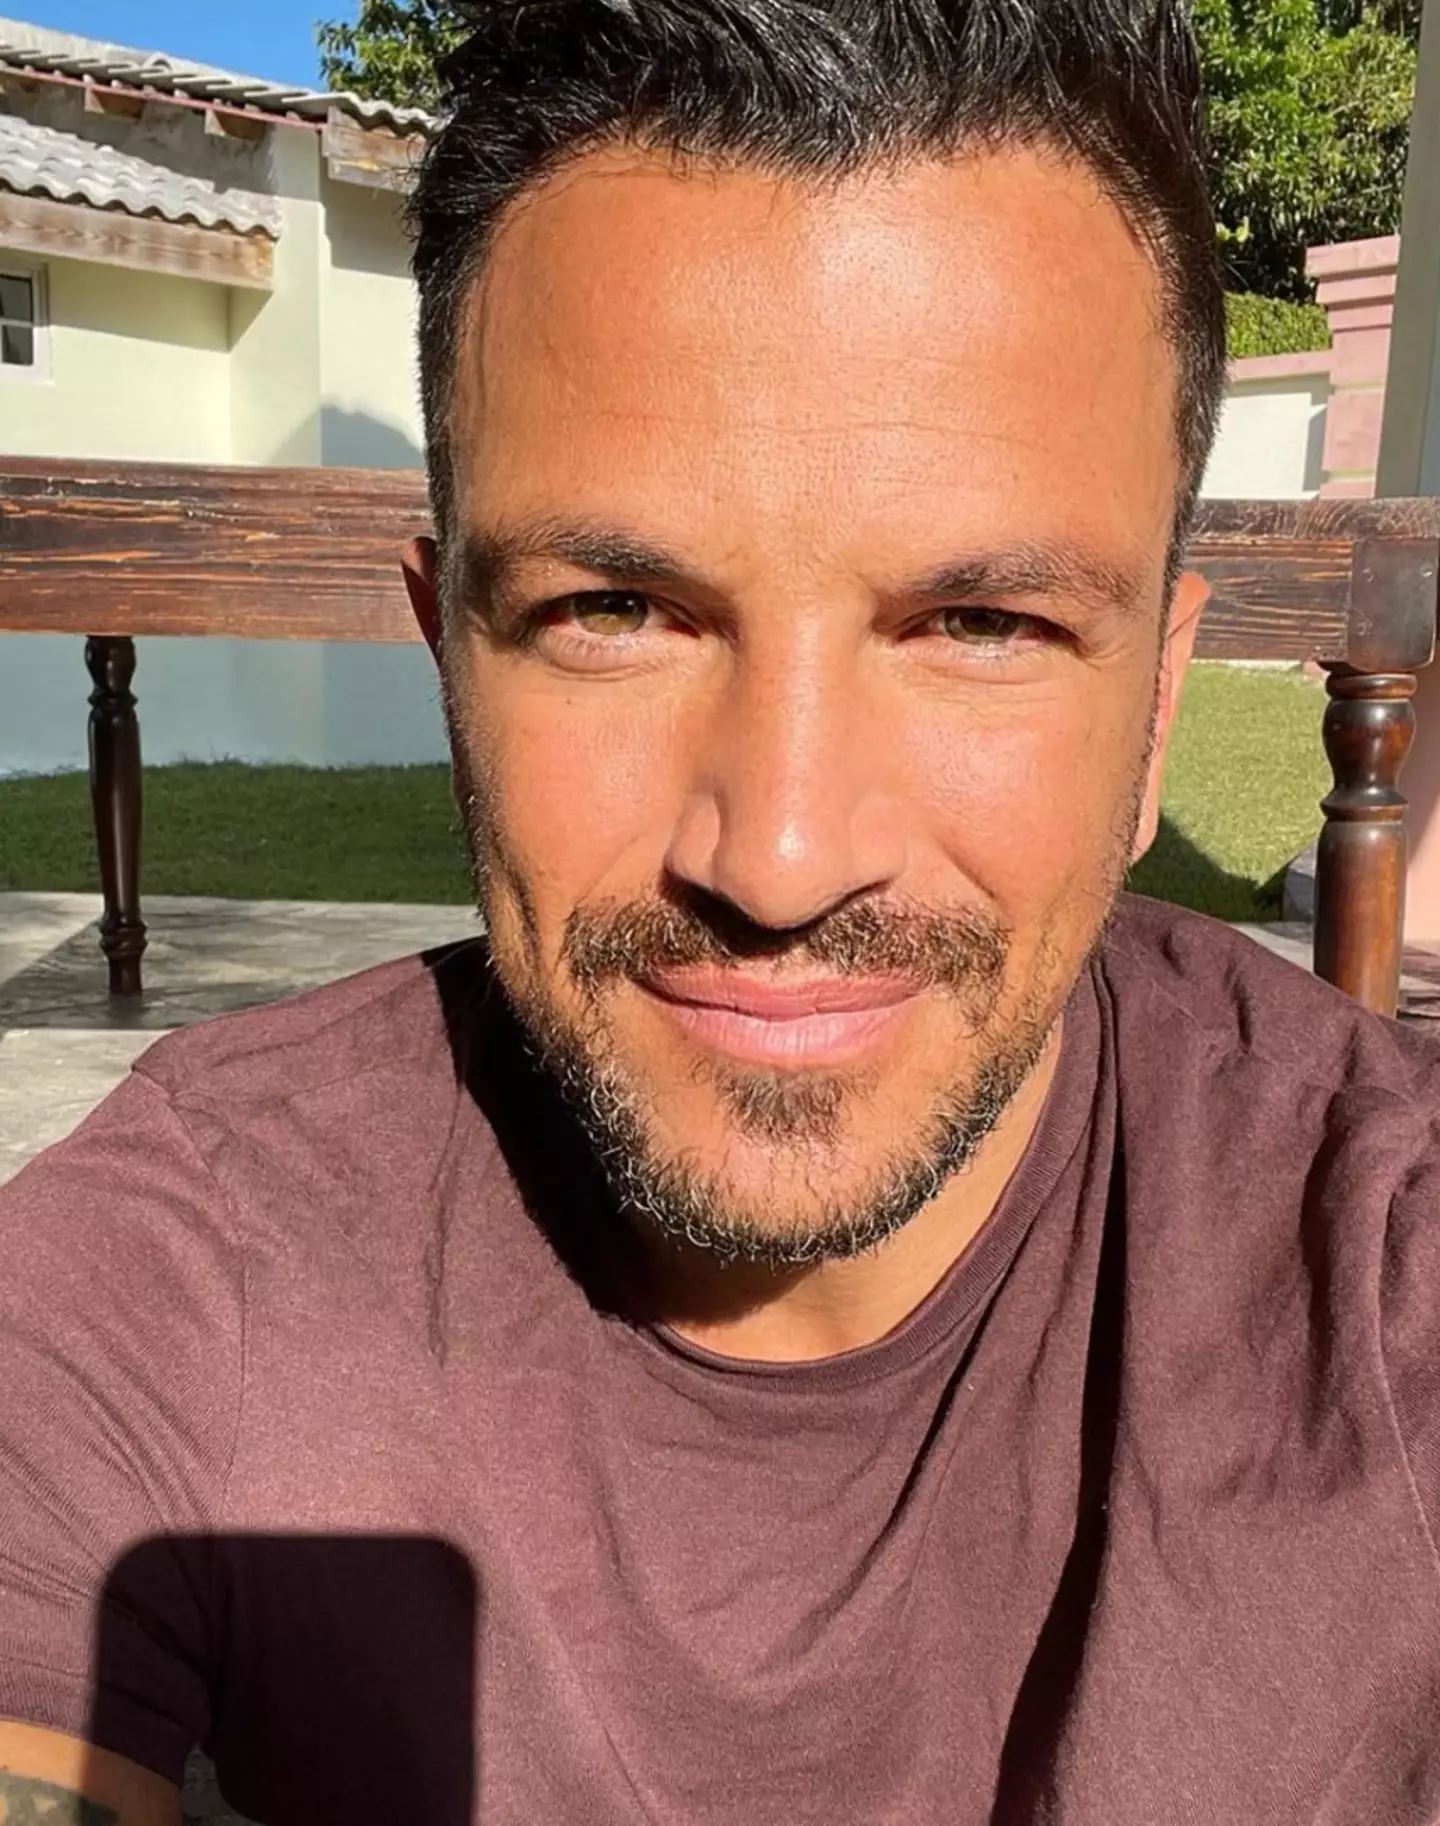 Peter Andre described Luca's comment as 'stupid'.